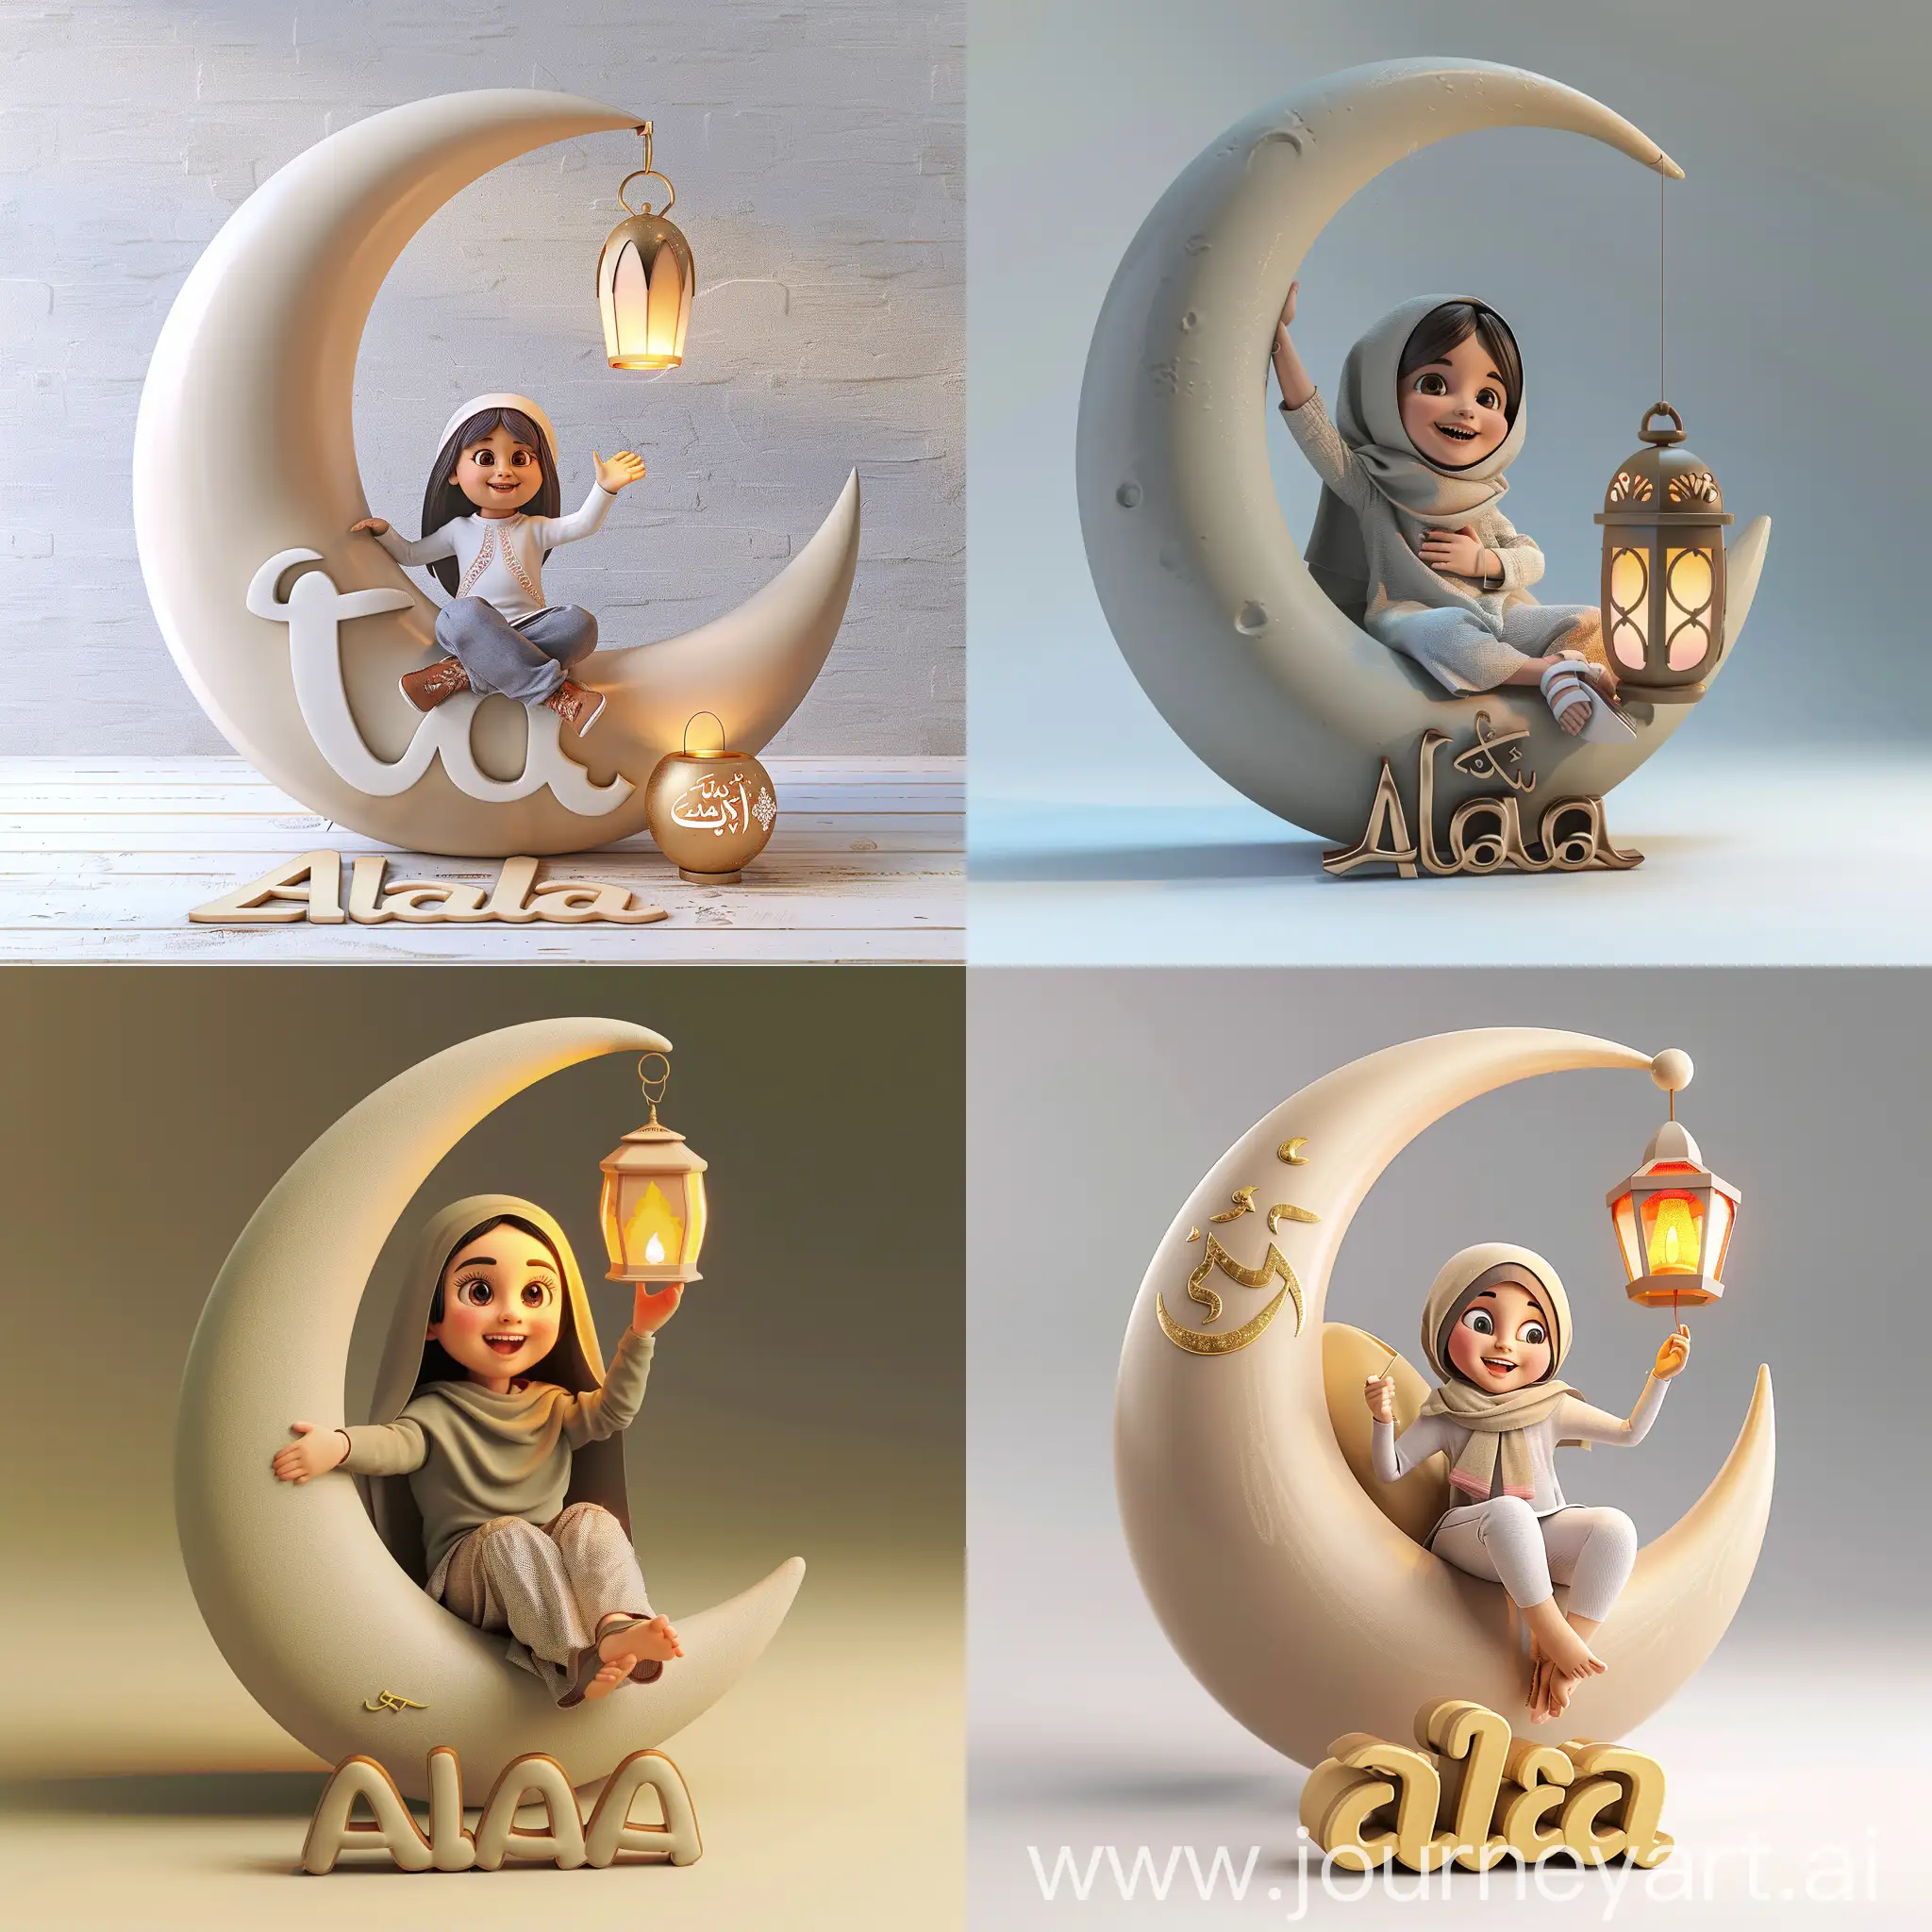 a Muslim girl sitting on a 3d crescent moon holding a Ramadan lantern and smiling, on the ground there is a big 3d text "Alaa"